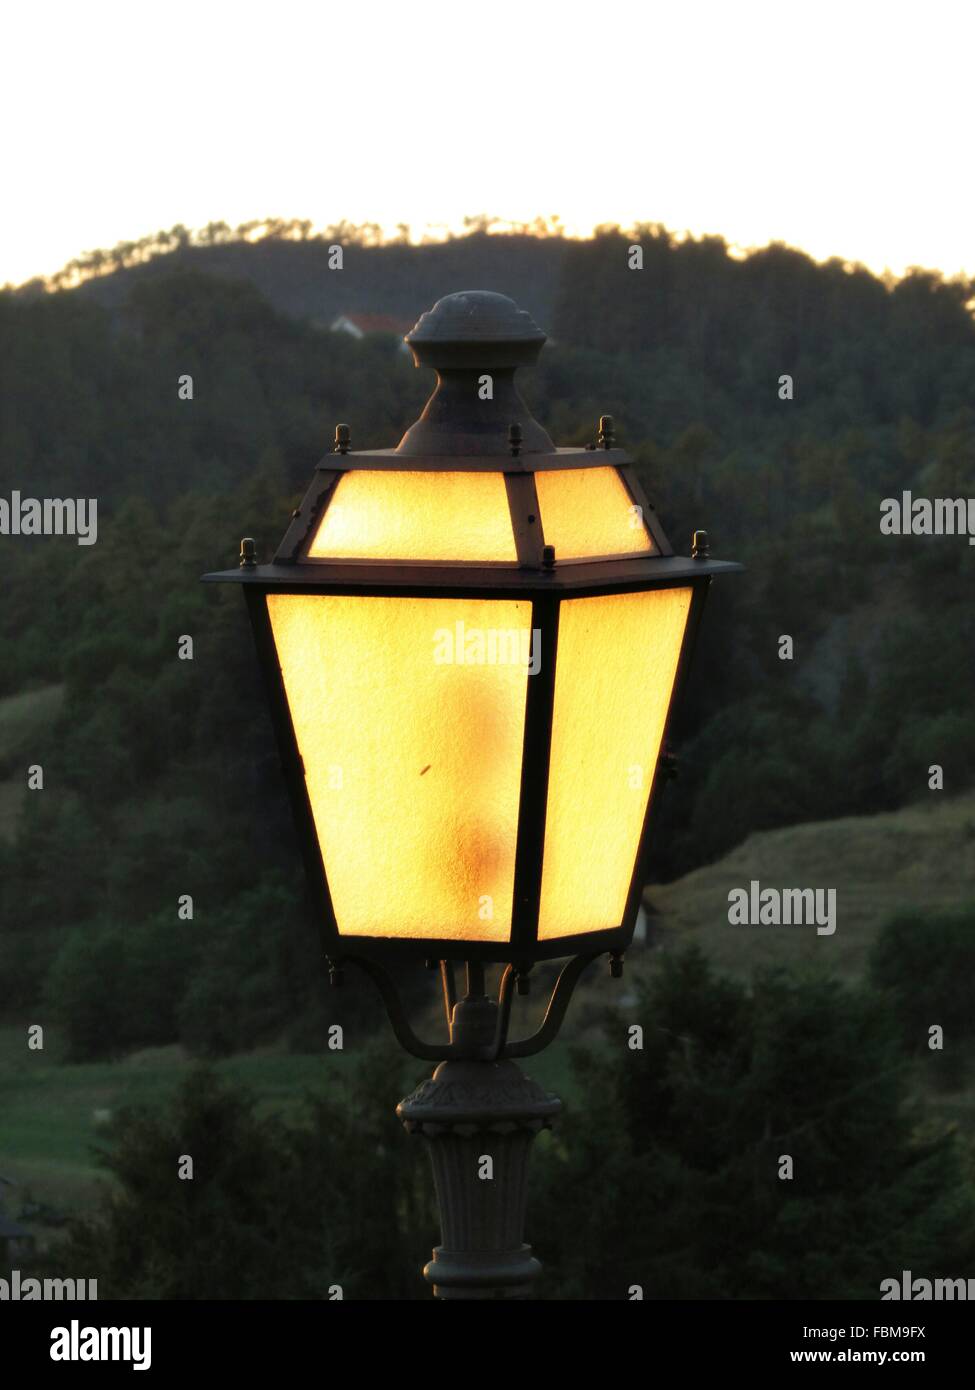 Ornate Lamp With Hills In Background Stock Photo